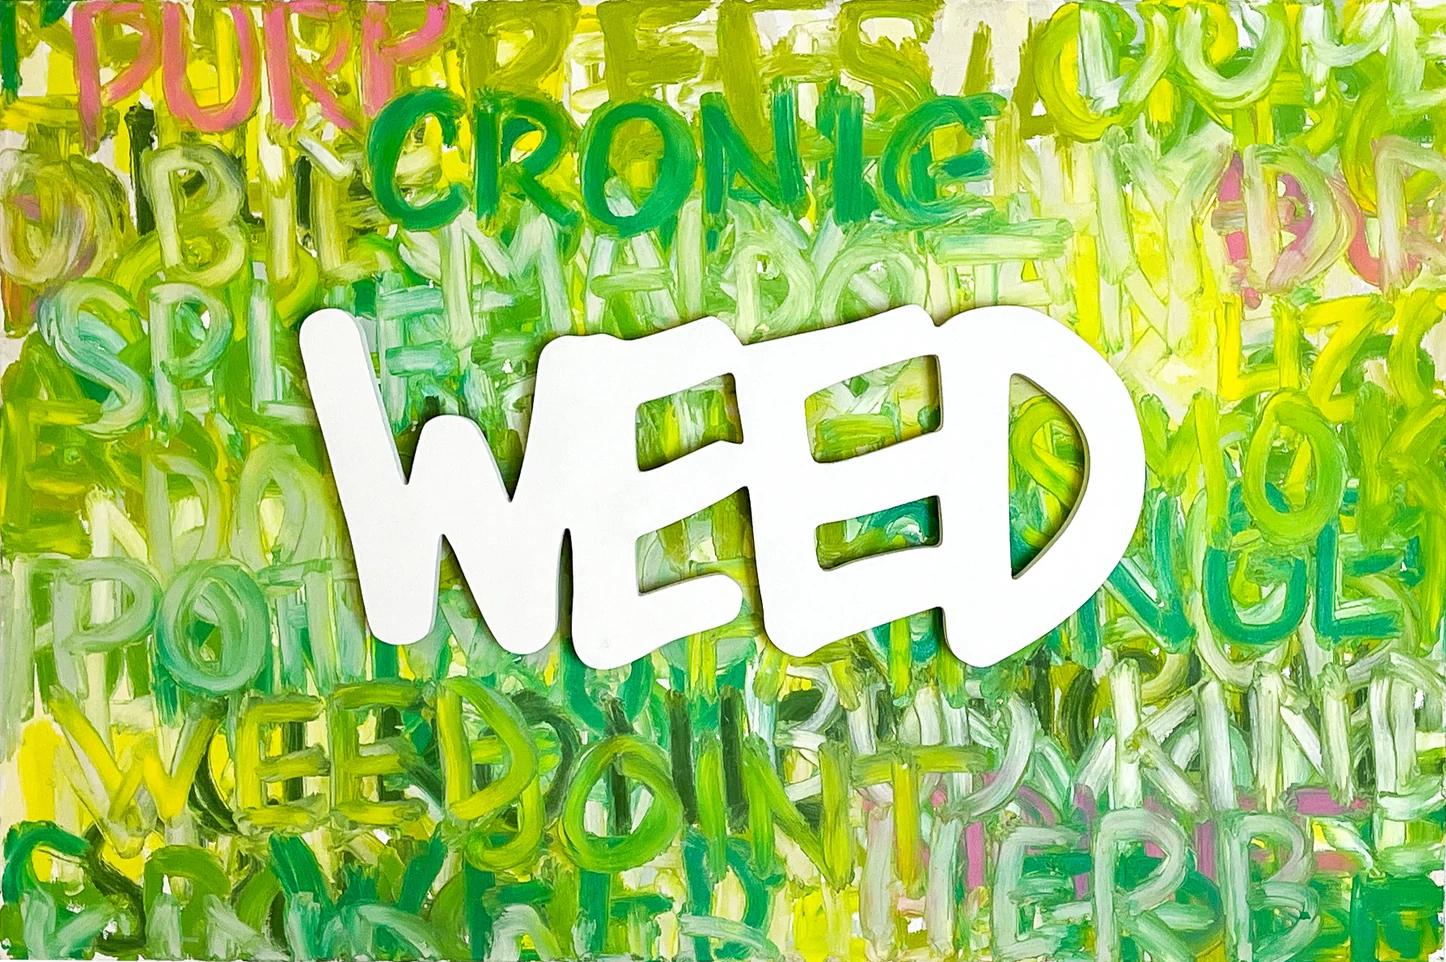 "Weed" Mixed media on wood 20" x 30" x 3" inch by Shawn Kolodny